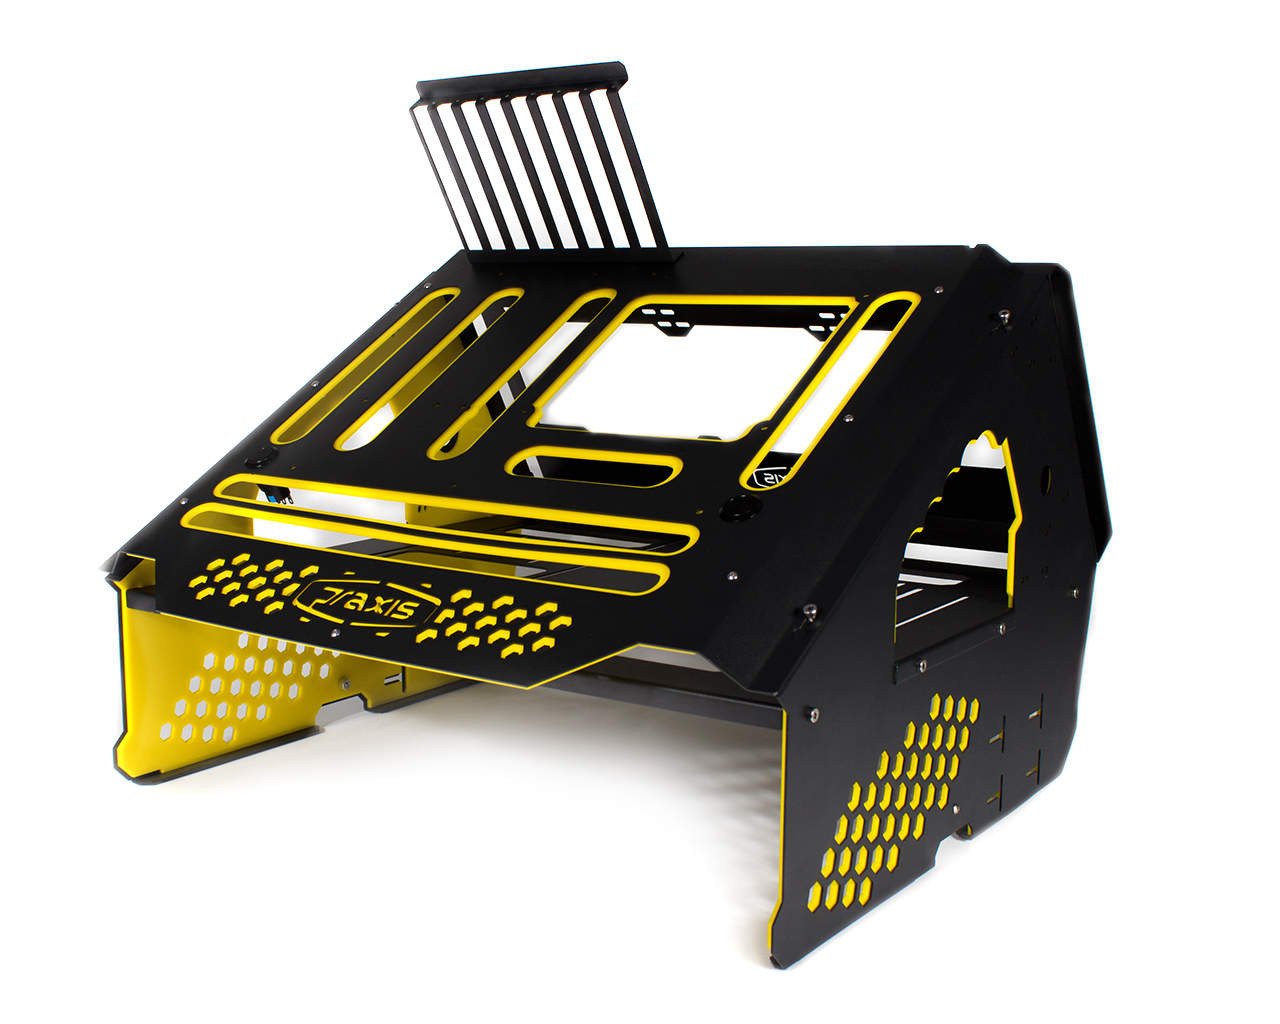 Praxis WetBench - PrimoChill - KEEPING IT COOL Black w/Solid Yellow Accents